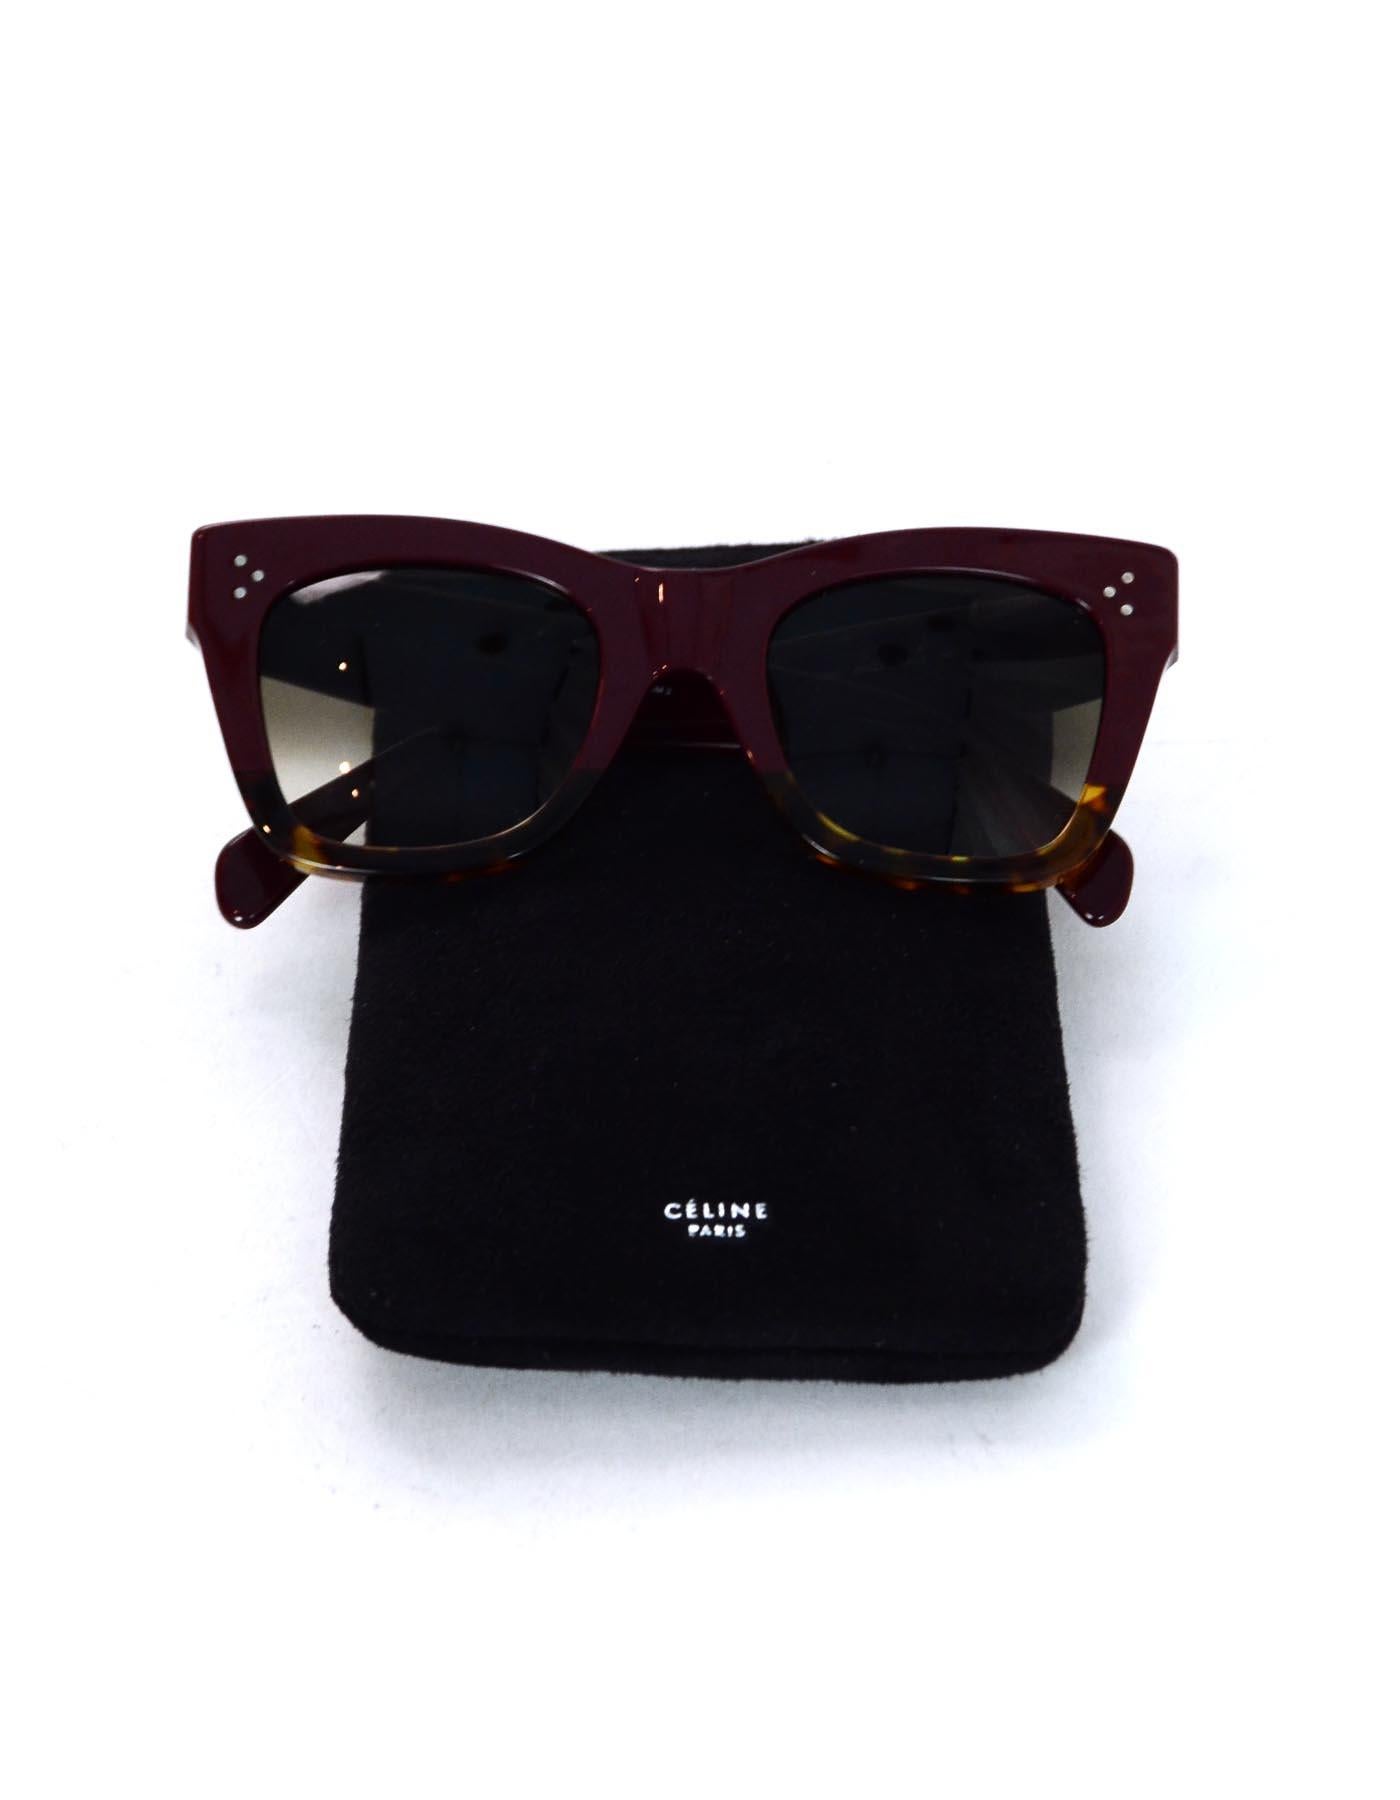 Celine Burgundy/Tortoise Catherine Sunglasses

Made In:  Italy
Color: Burgundy, tortoise 
Hardware: Silvertone
Materials: Resin
Overall Condition: Excellent pre-owned condition 
Estimated Retail: $350 + tax
Includes:  Celine case and cleaning cloth